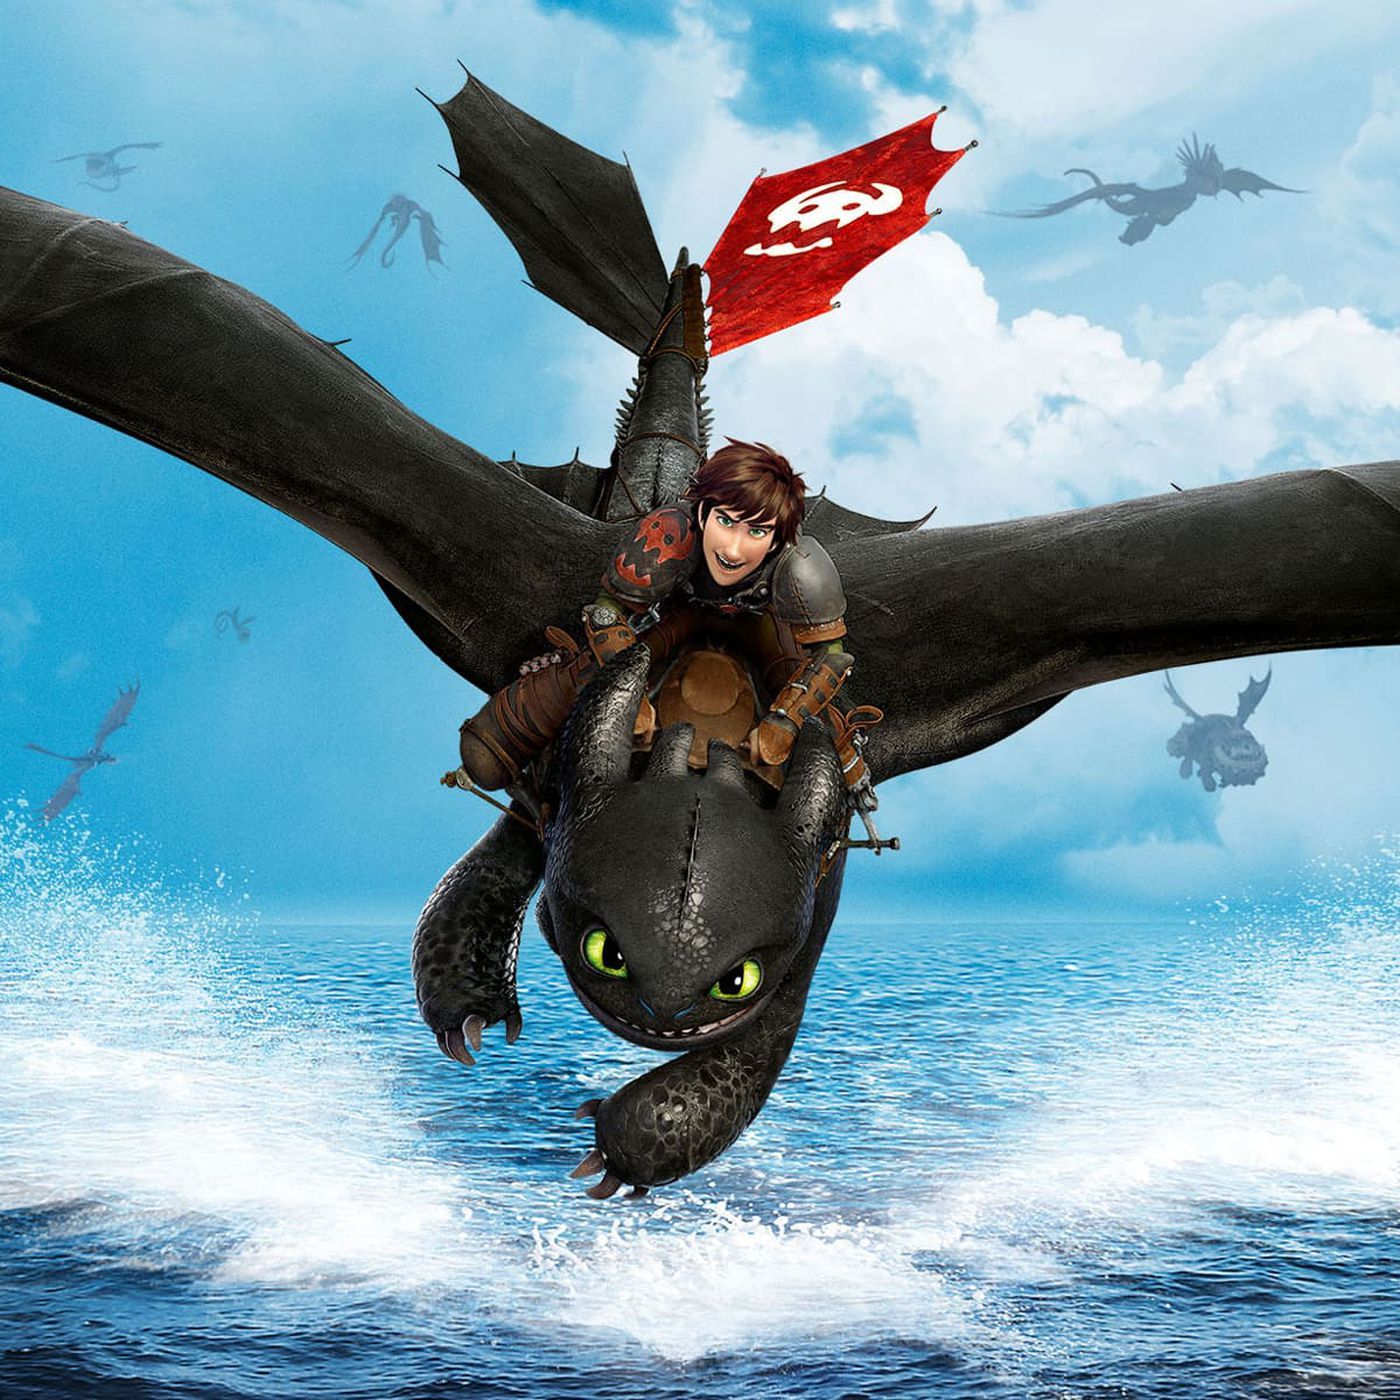 How To Train Your Dragon 4 Wallpapers - Wallpaper Cave